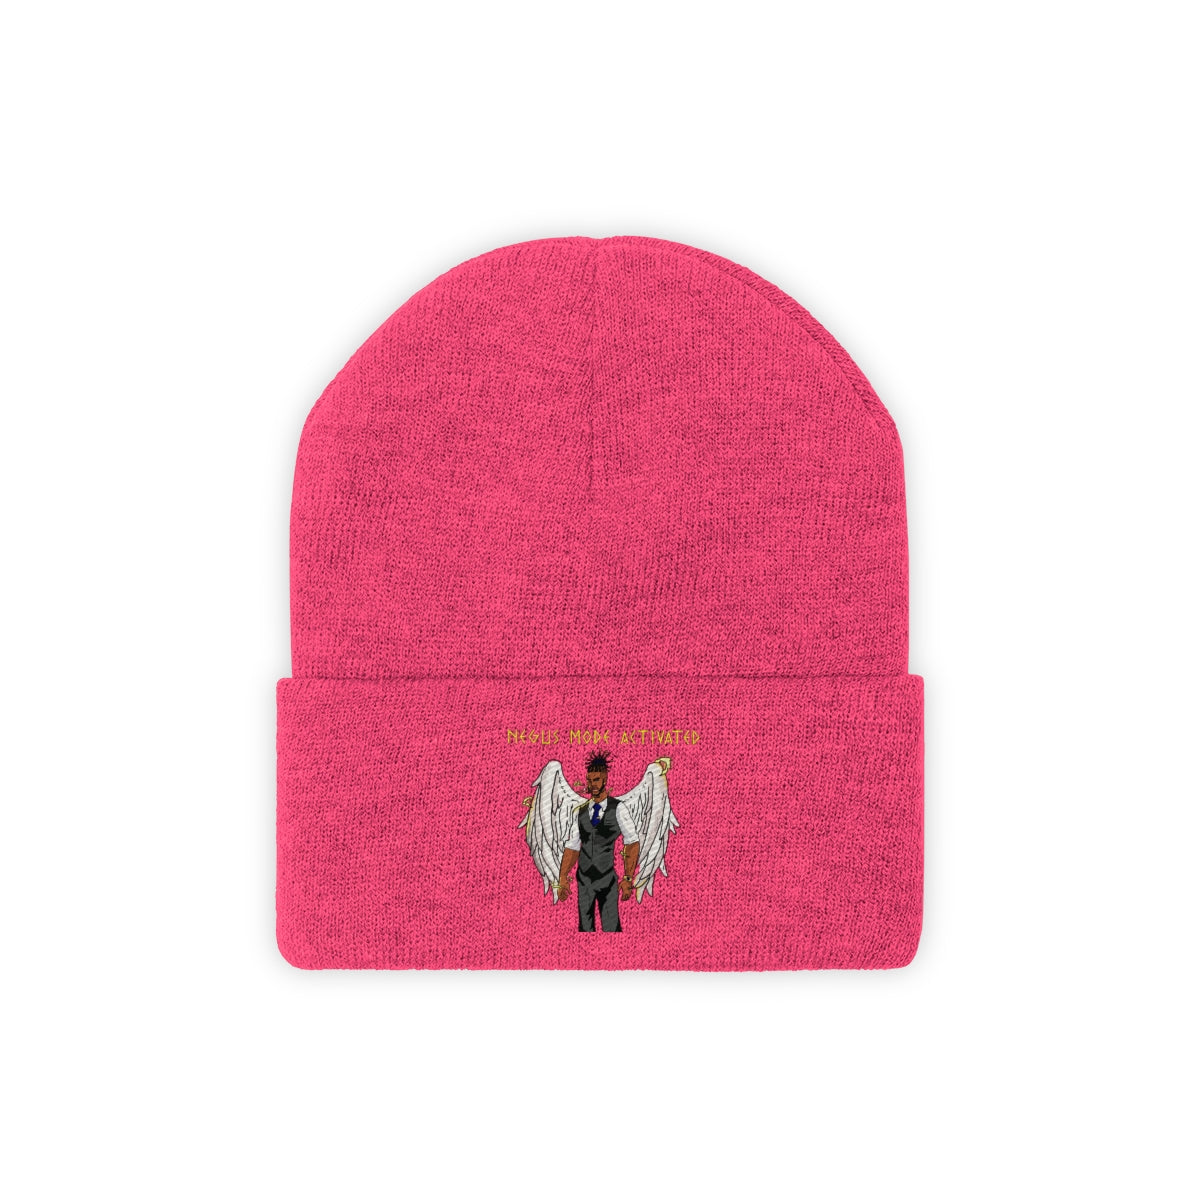 "Negus Mode Activated" Knitted Beanie